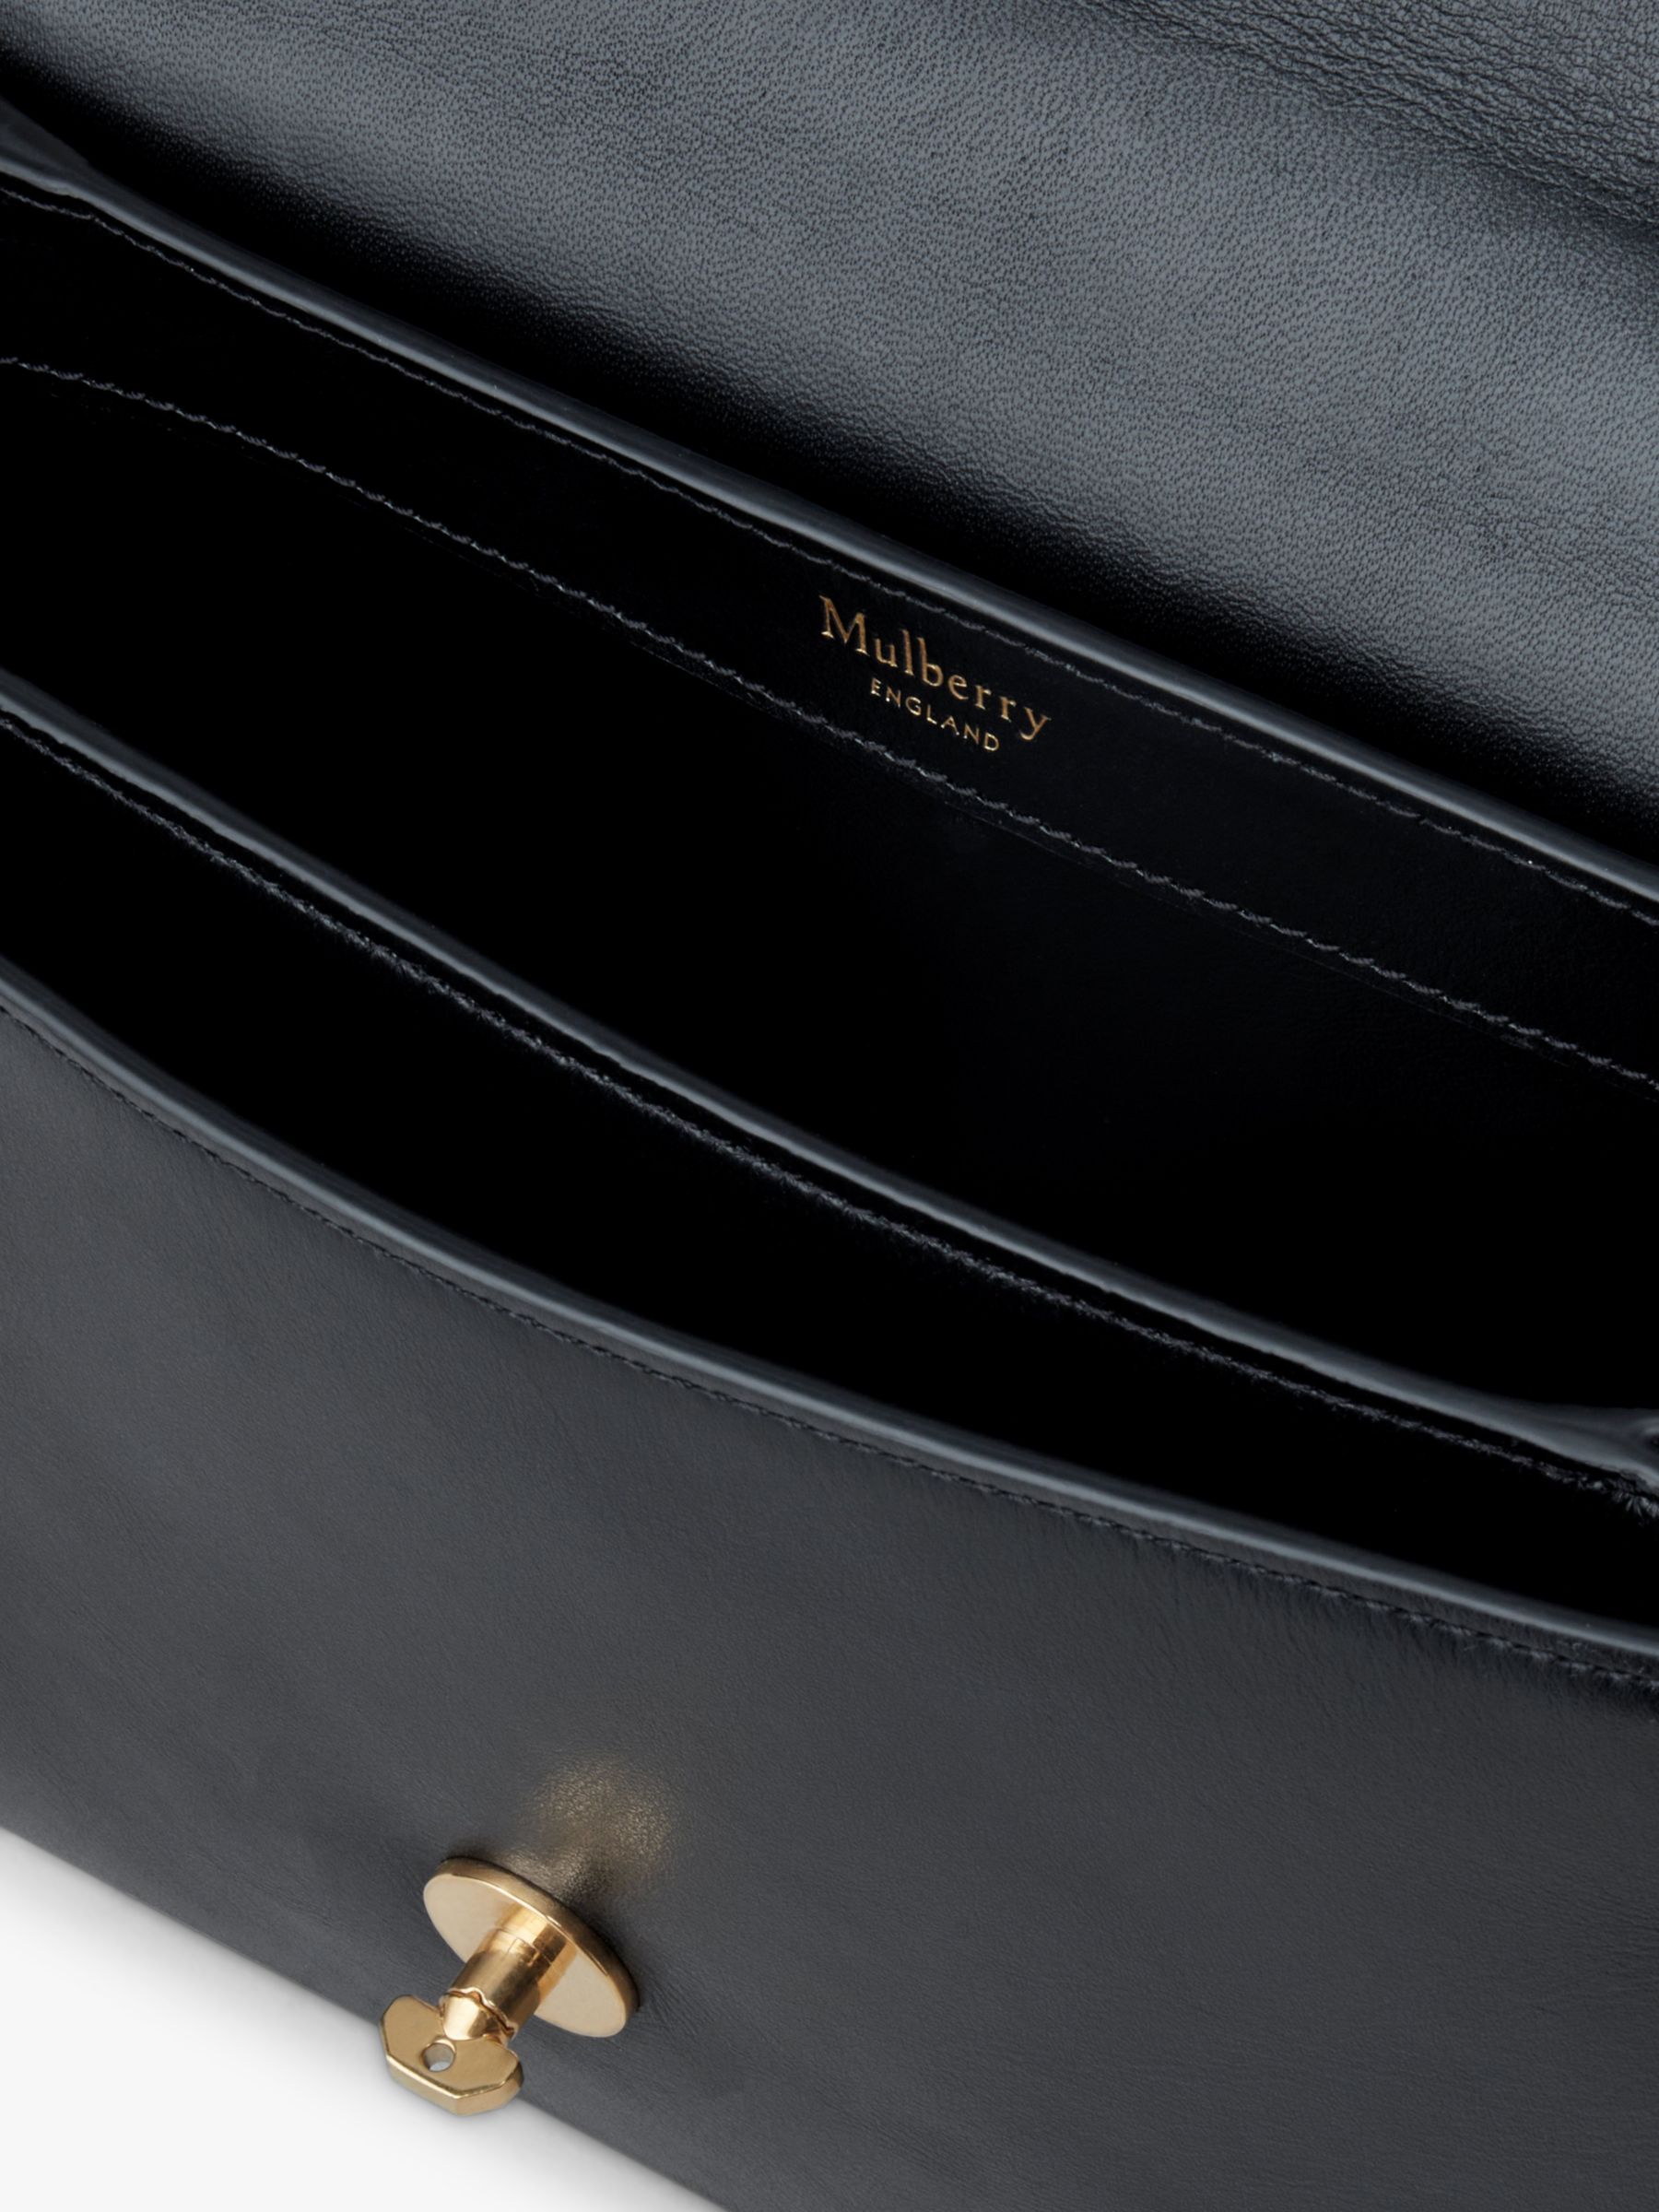 Mulberry Lana High Gloss Leather Top Handle Bag, Black at John Lewis ...